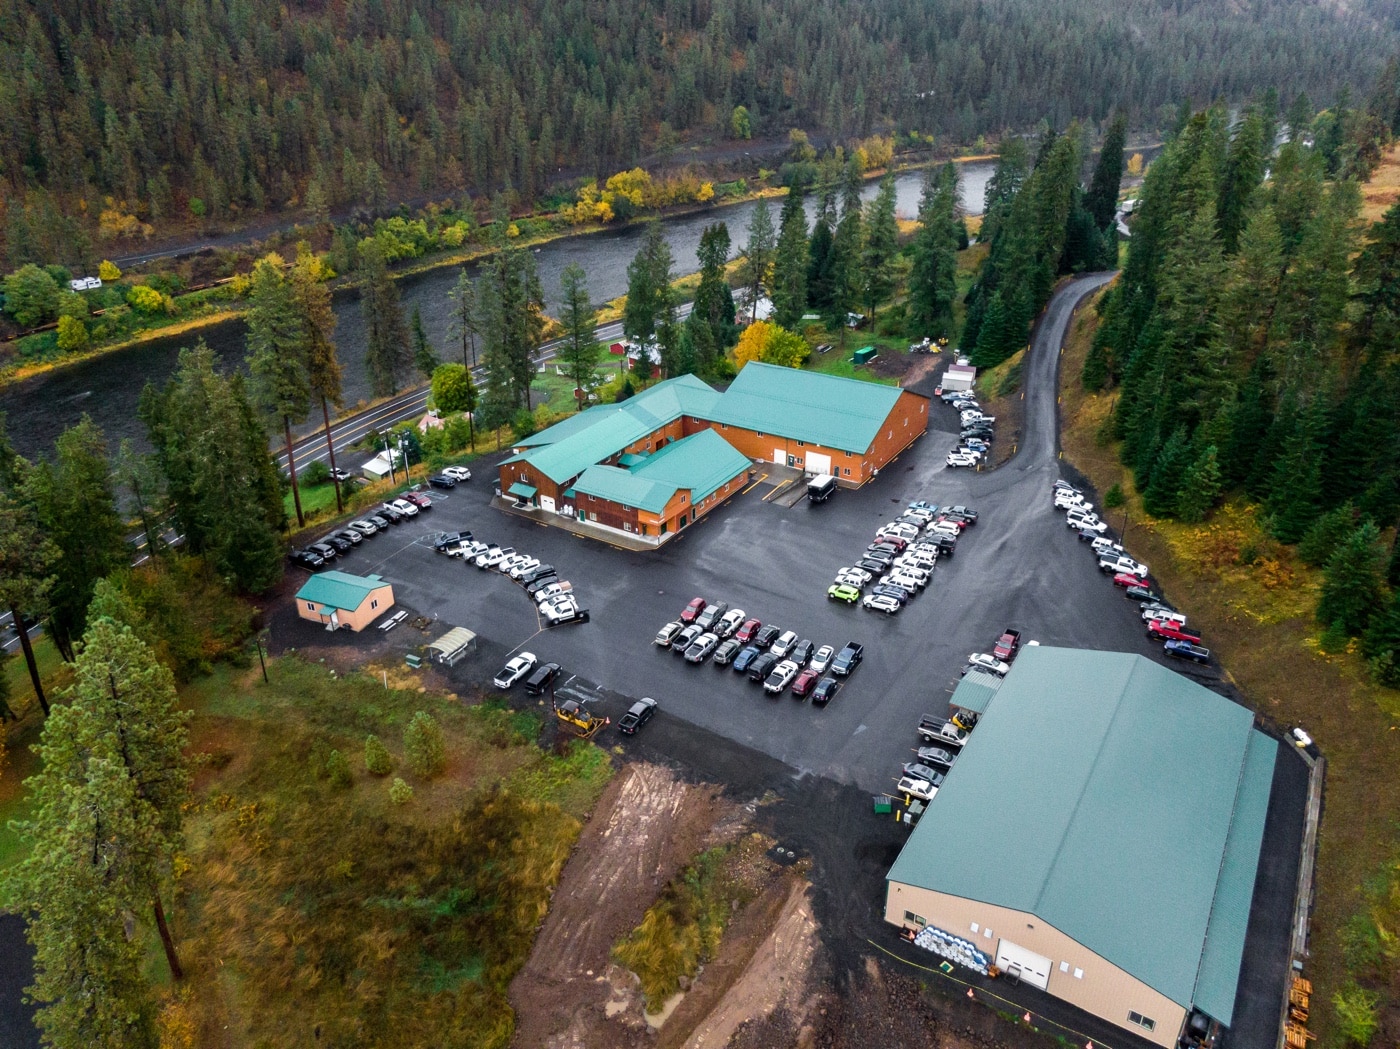 In this digital image, we see the Nightforce Optics manufacturing facility from the air. The facility features two main buildings with a smaller auxiliary building. There is a large parking lot with many cars and trucks parked in it. There are many motor vehicles here. In the surrounding area we can see a river, mountains and evergreen trees.